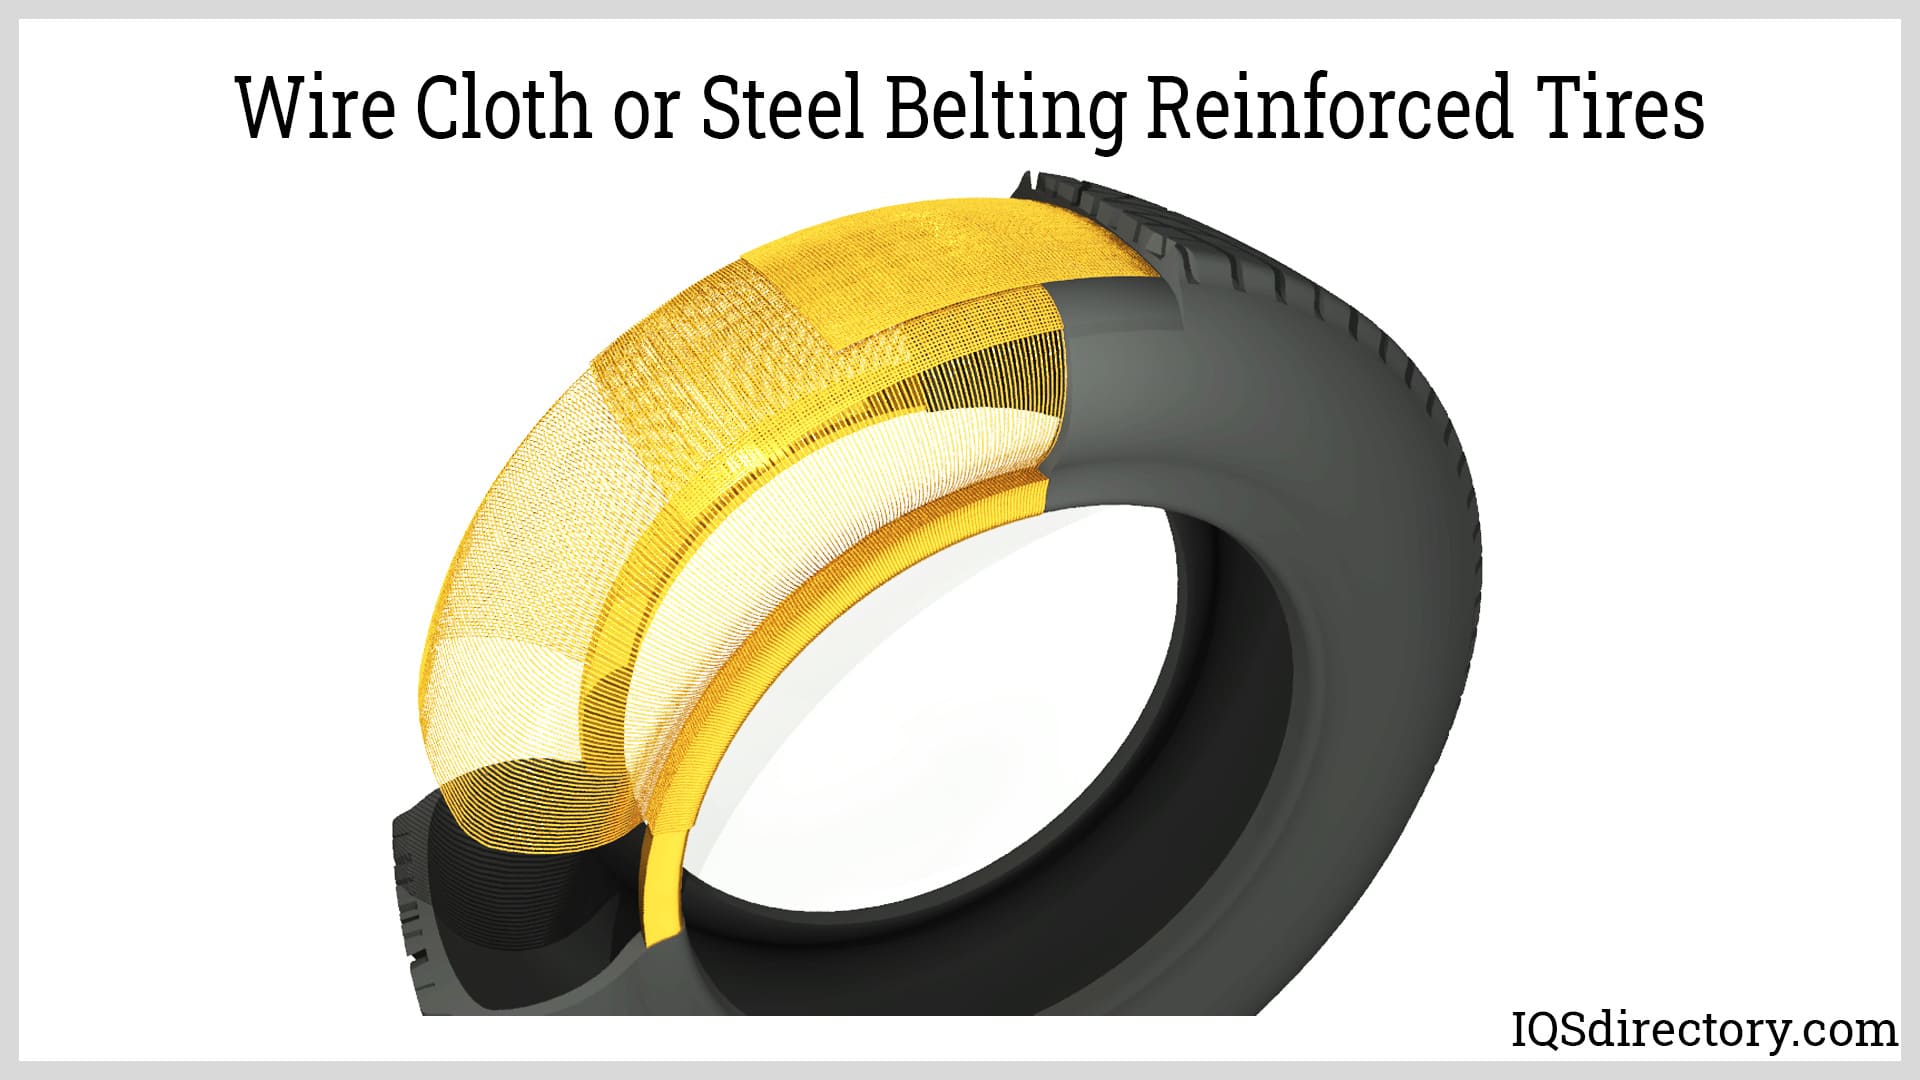 Wire Cloth or Steel Belting Reinforced Tires